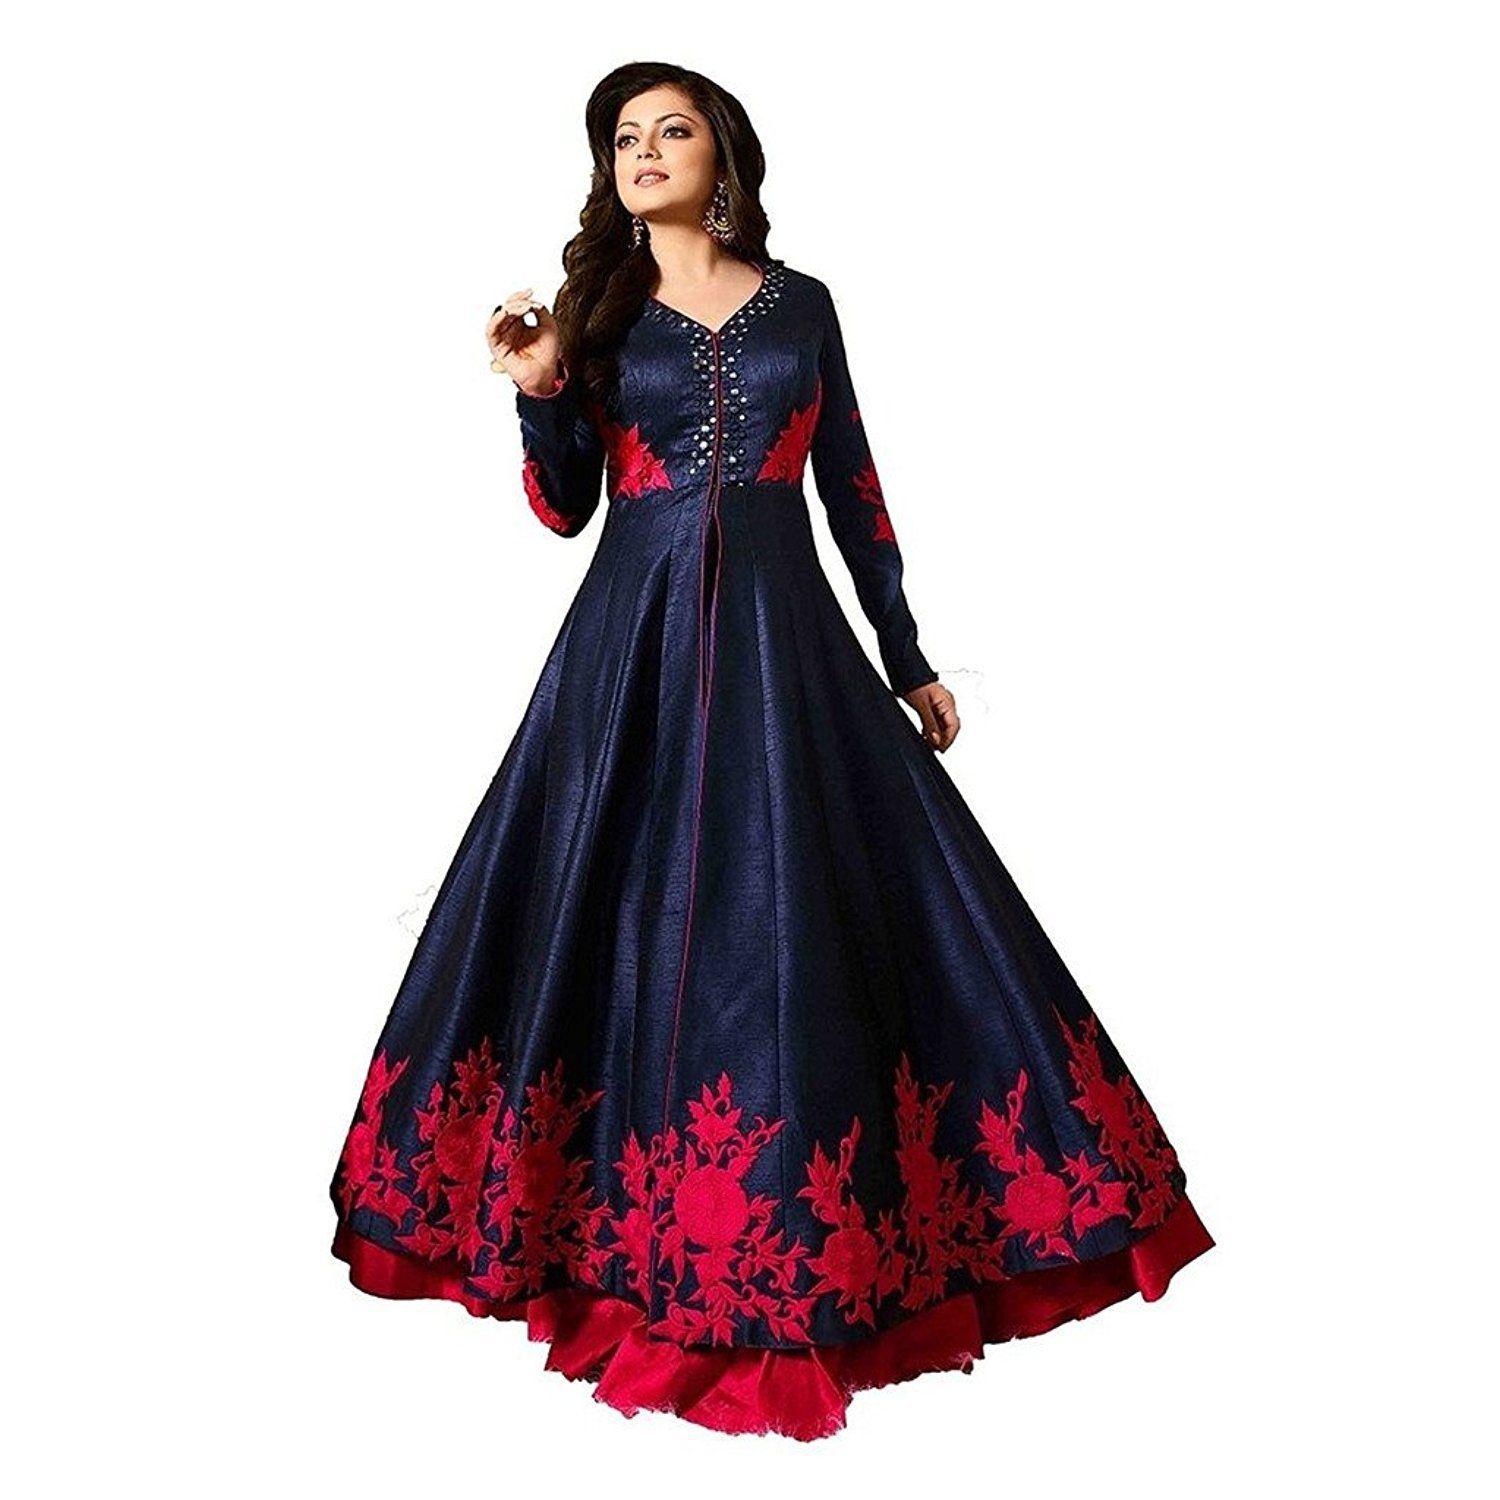 Navy/Blue Readymade Gown Set With Shawl For Women - Online shopping in Nepal,  Nepal online shopping, Send gifts, Farlin product, Wall decor canvas,  dolls, buy gadgets, bed furniture, dinning chairs, sofa, baby